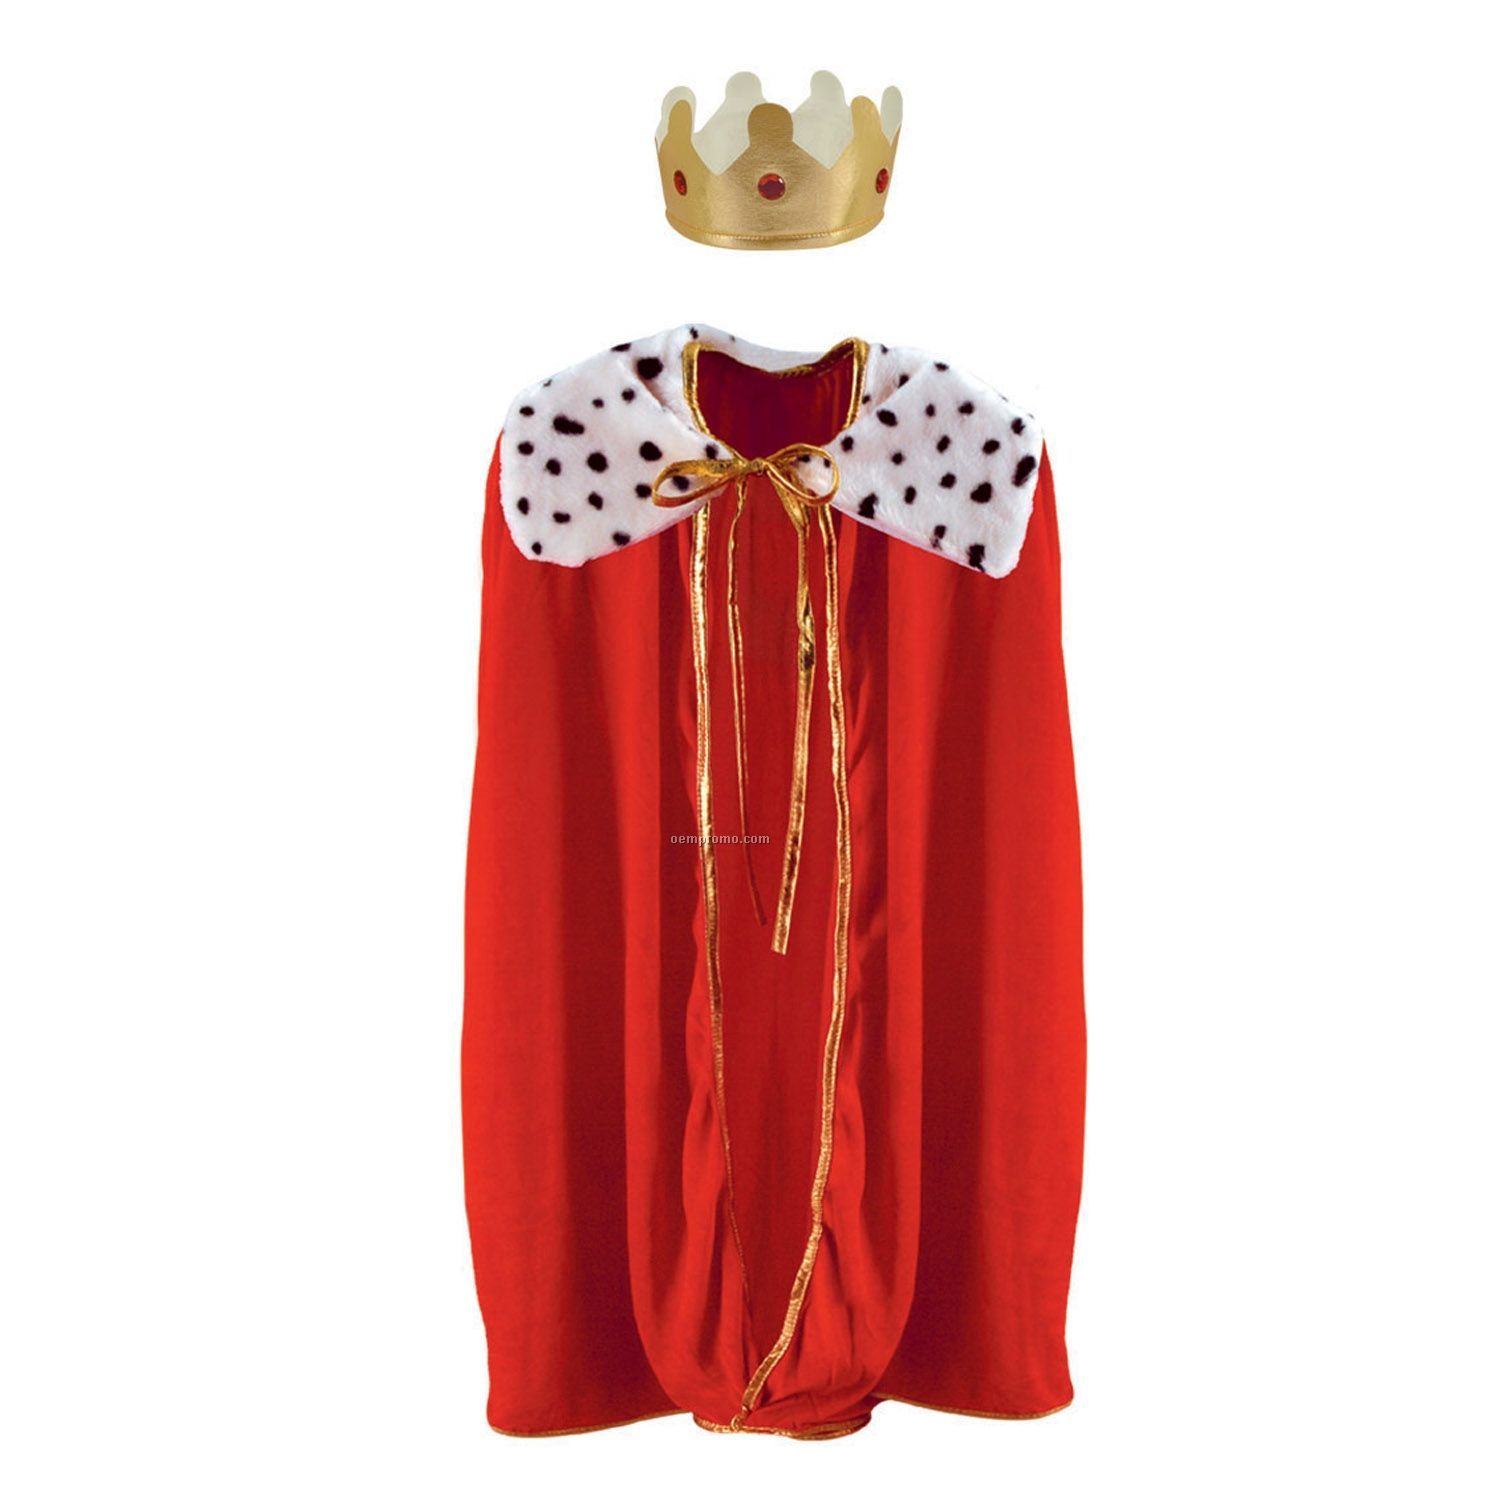 King robe clipart.